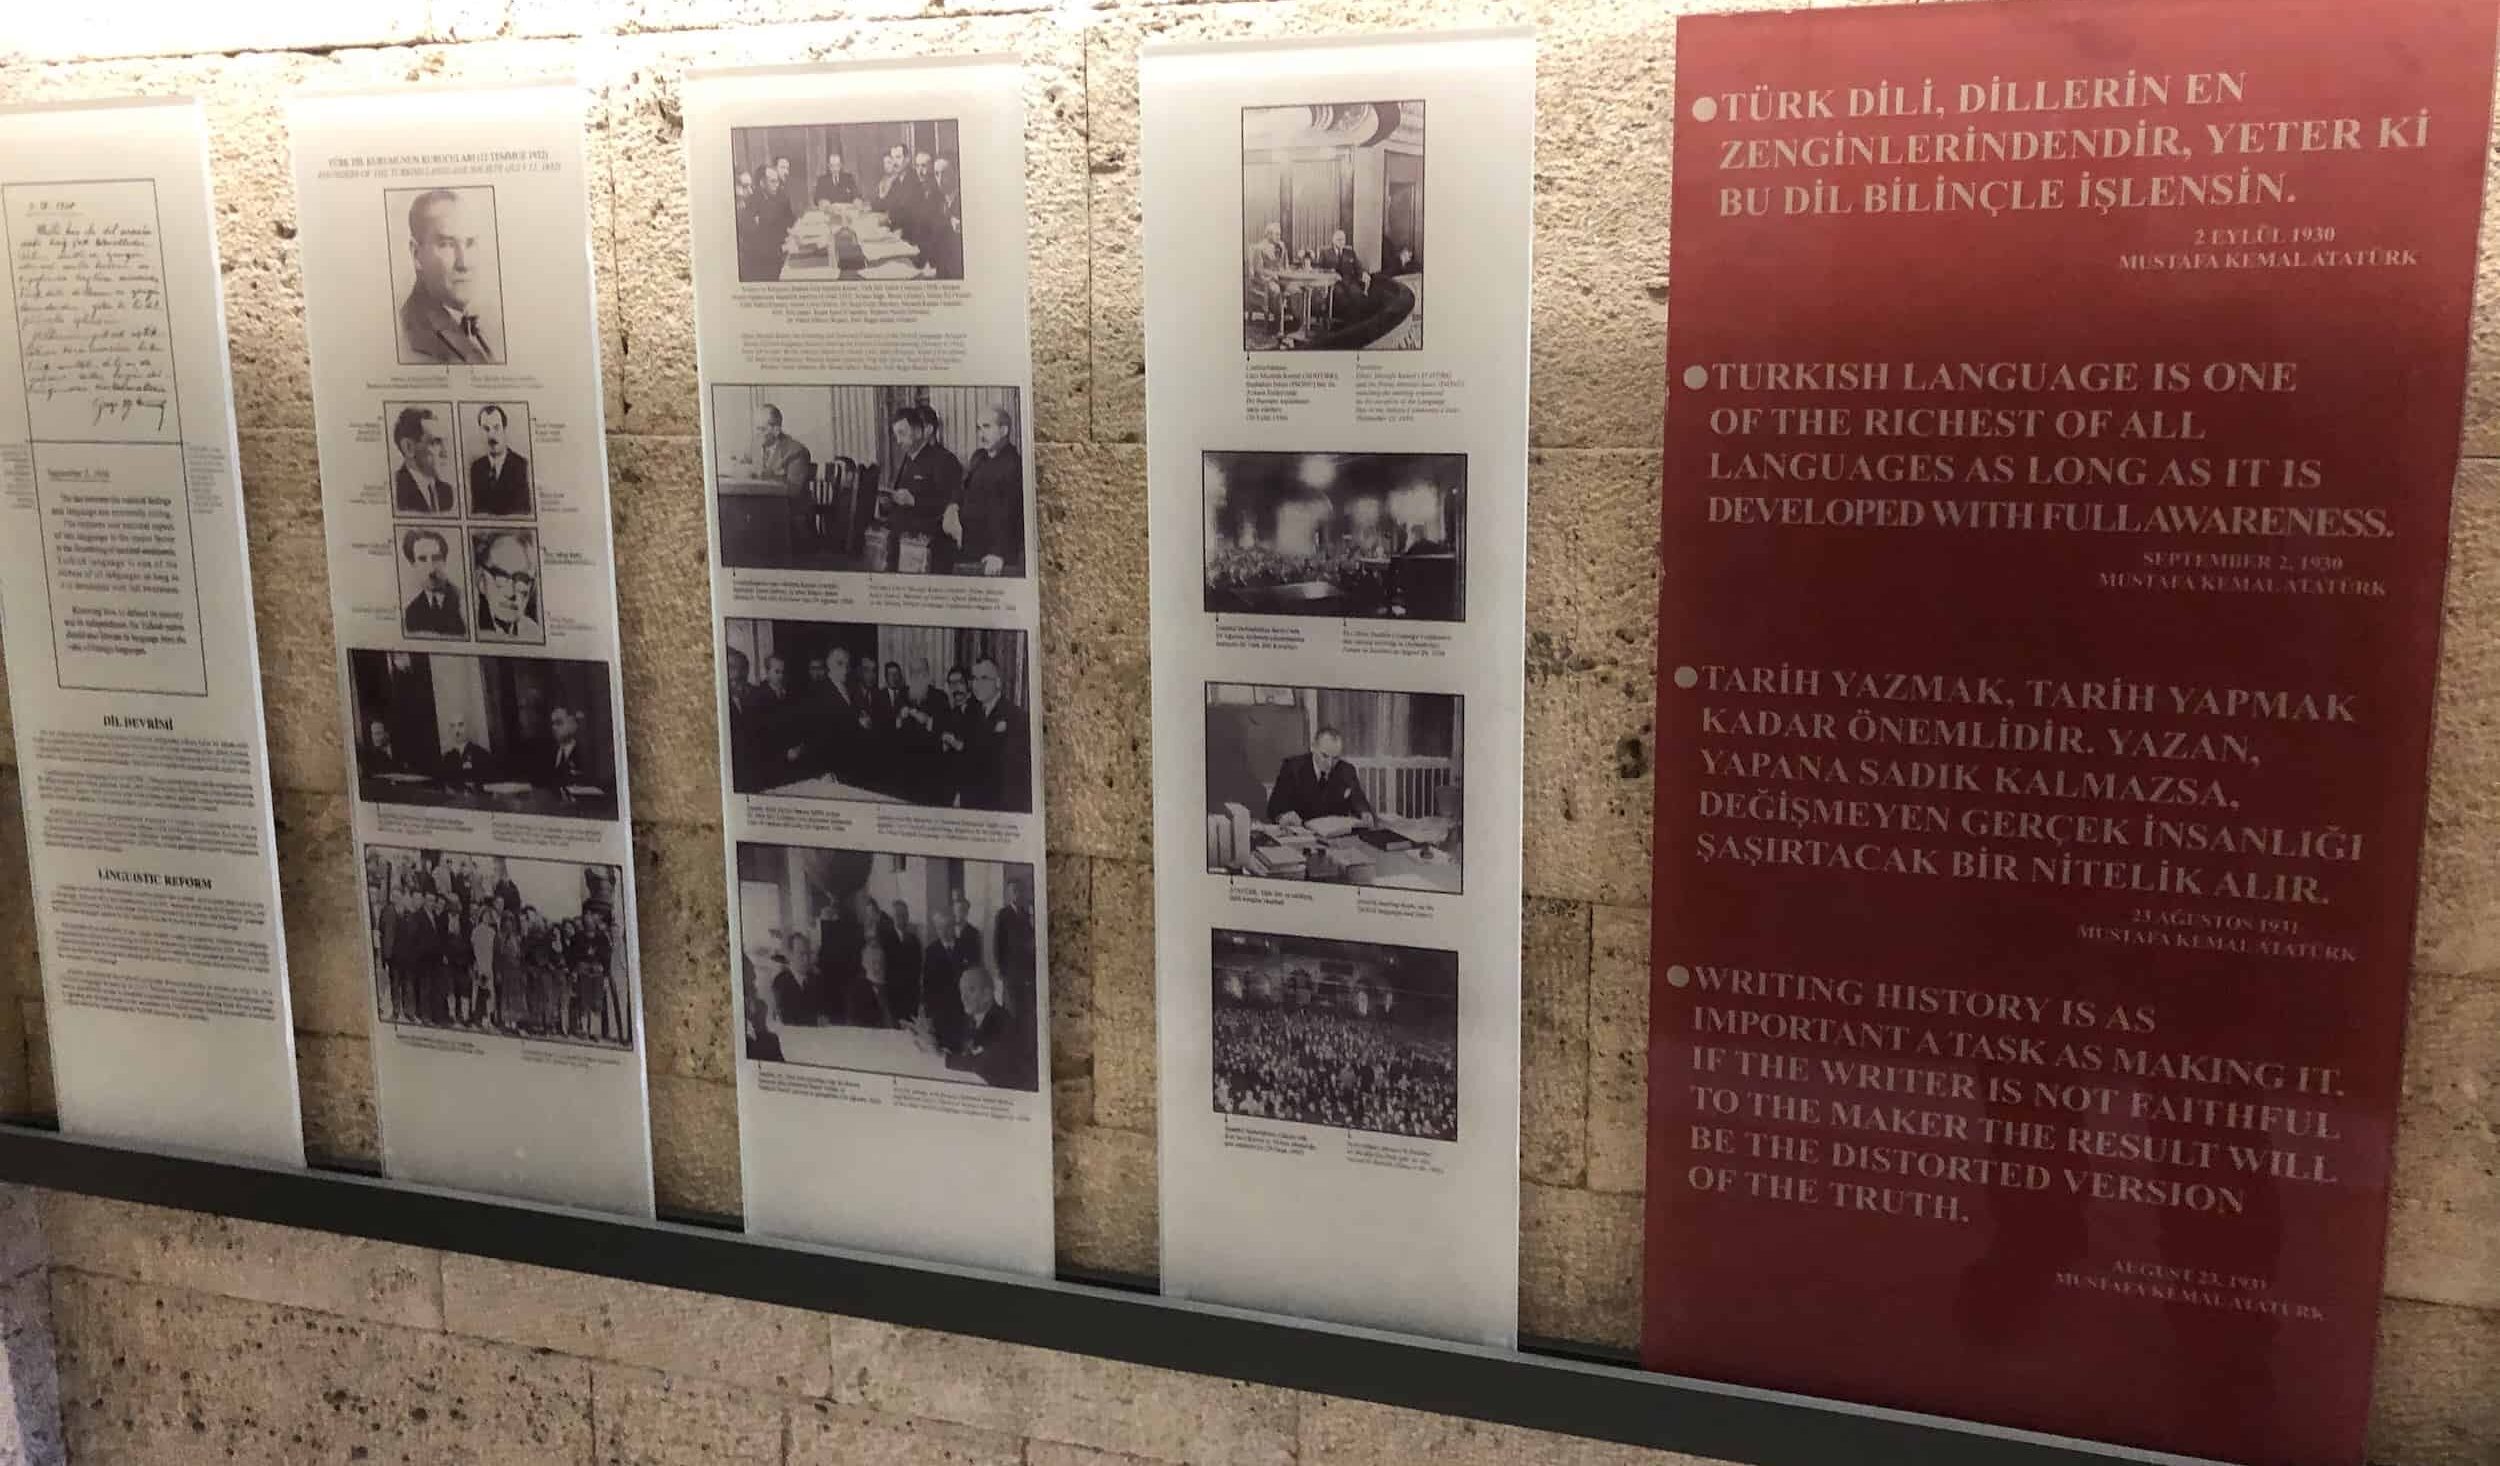 Reforms in the Turkish language and alphabet at the Atatürk and War of Independence Museum